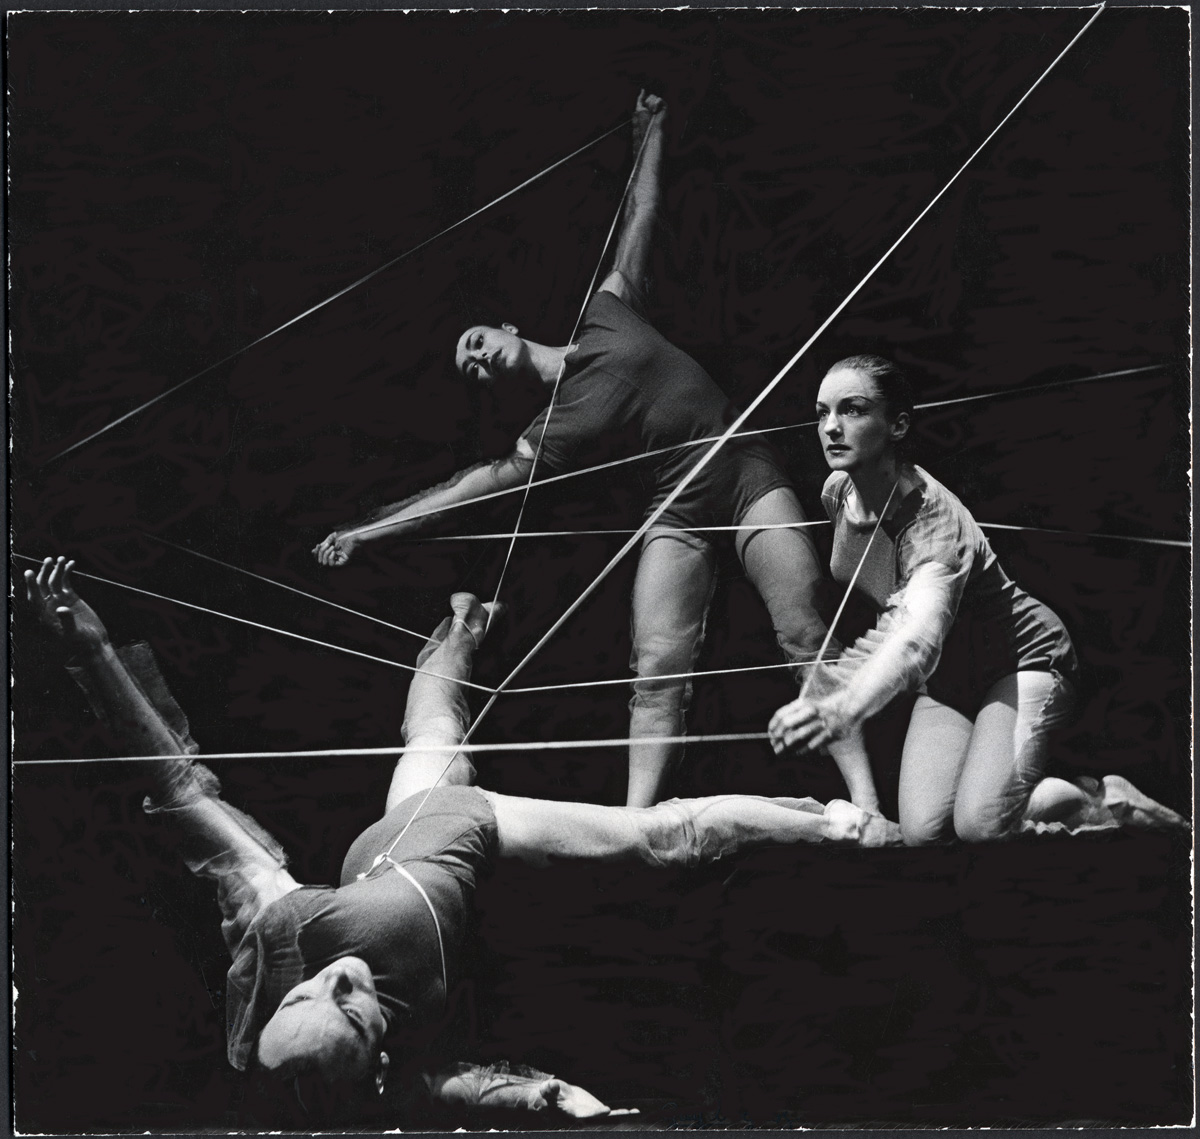 Three dancers with string during a performance of "Village of Whispers", created by Alwin Nikolais